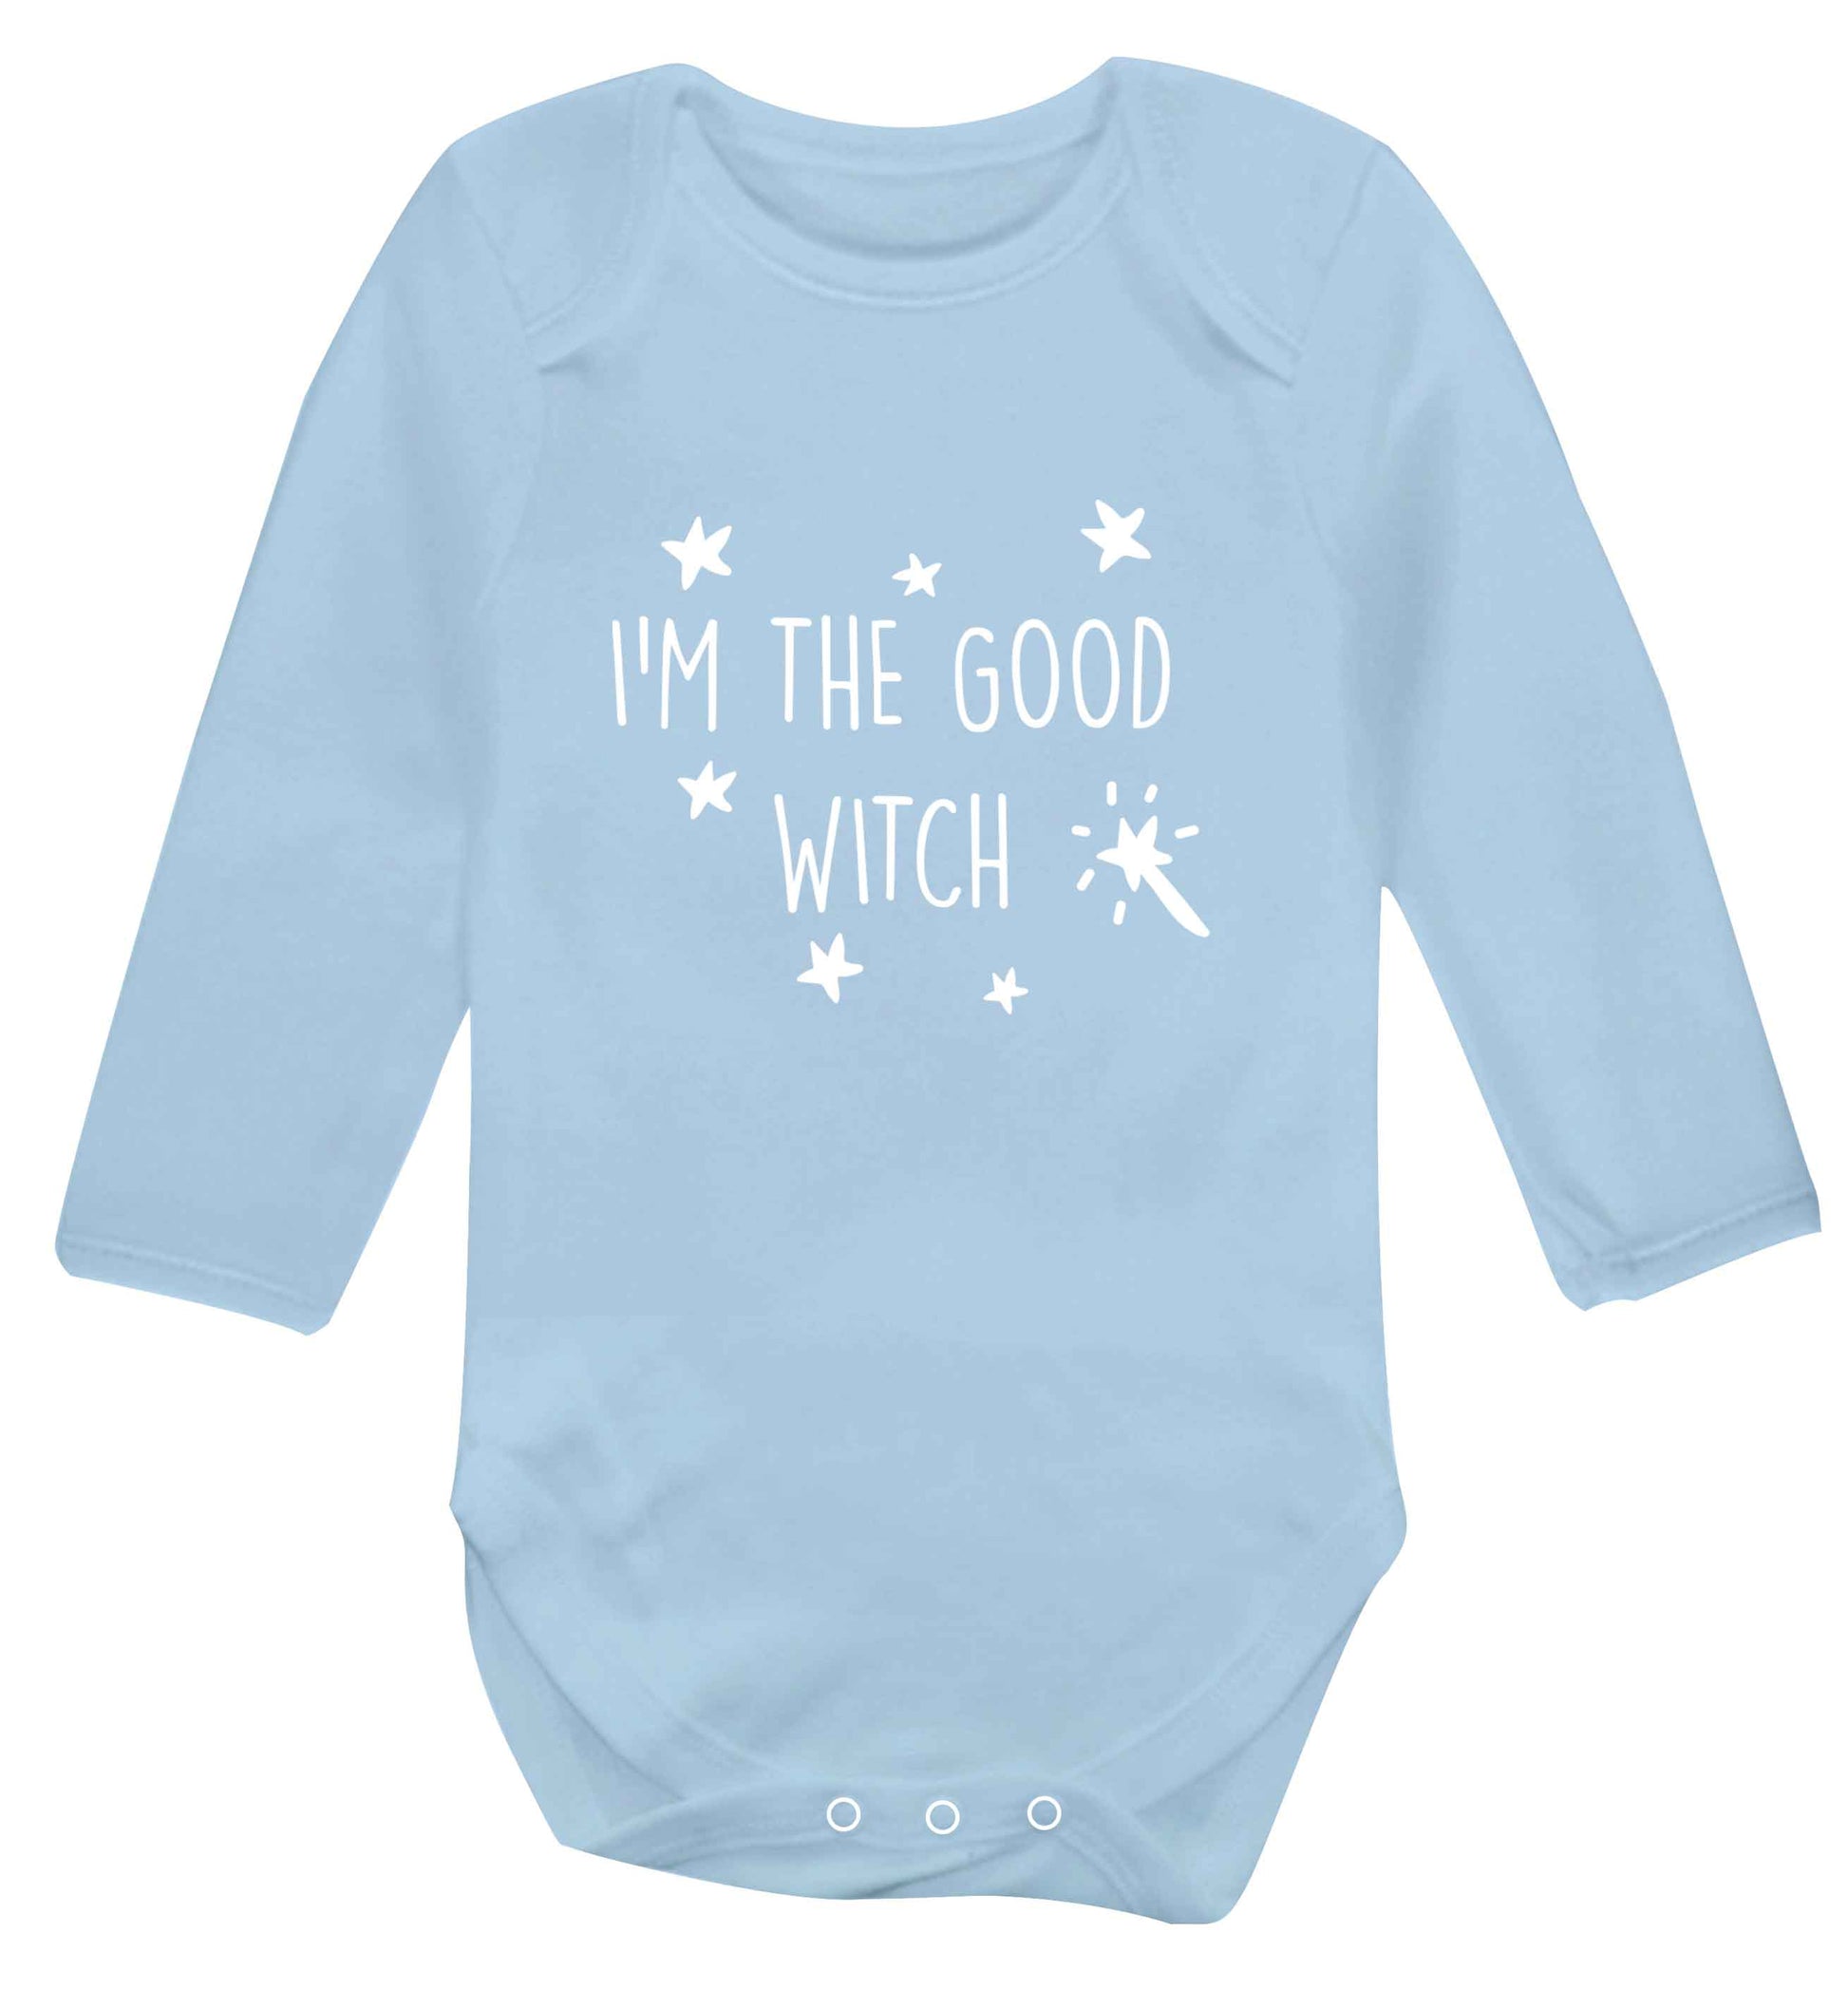 Good witch baby vest long sleeved pale blue 6-12 months